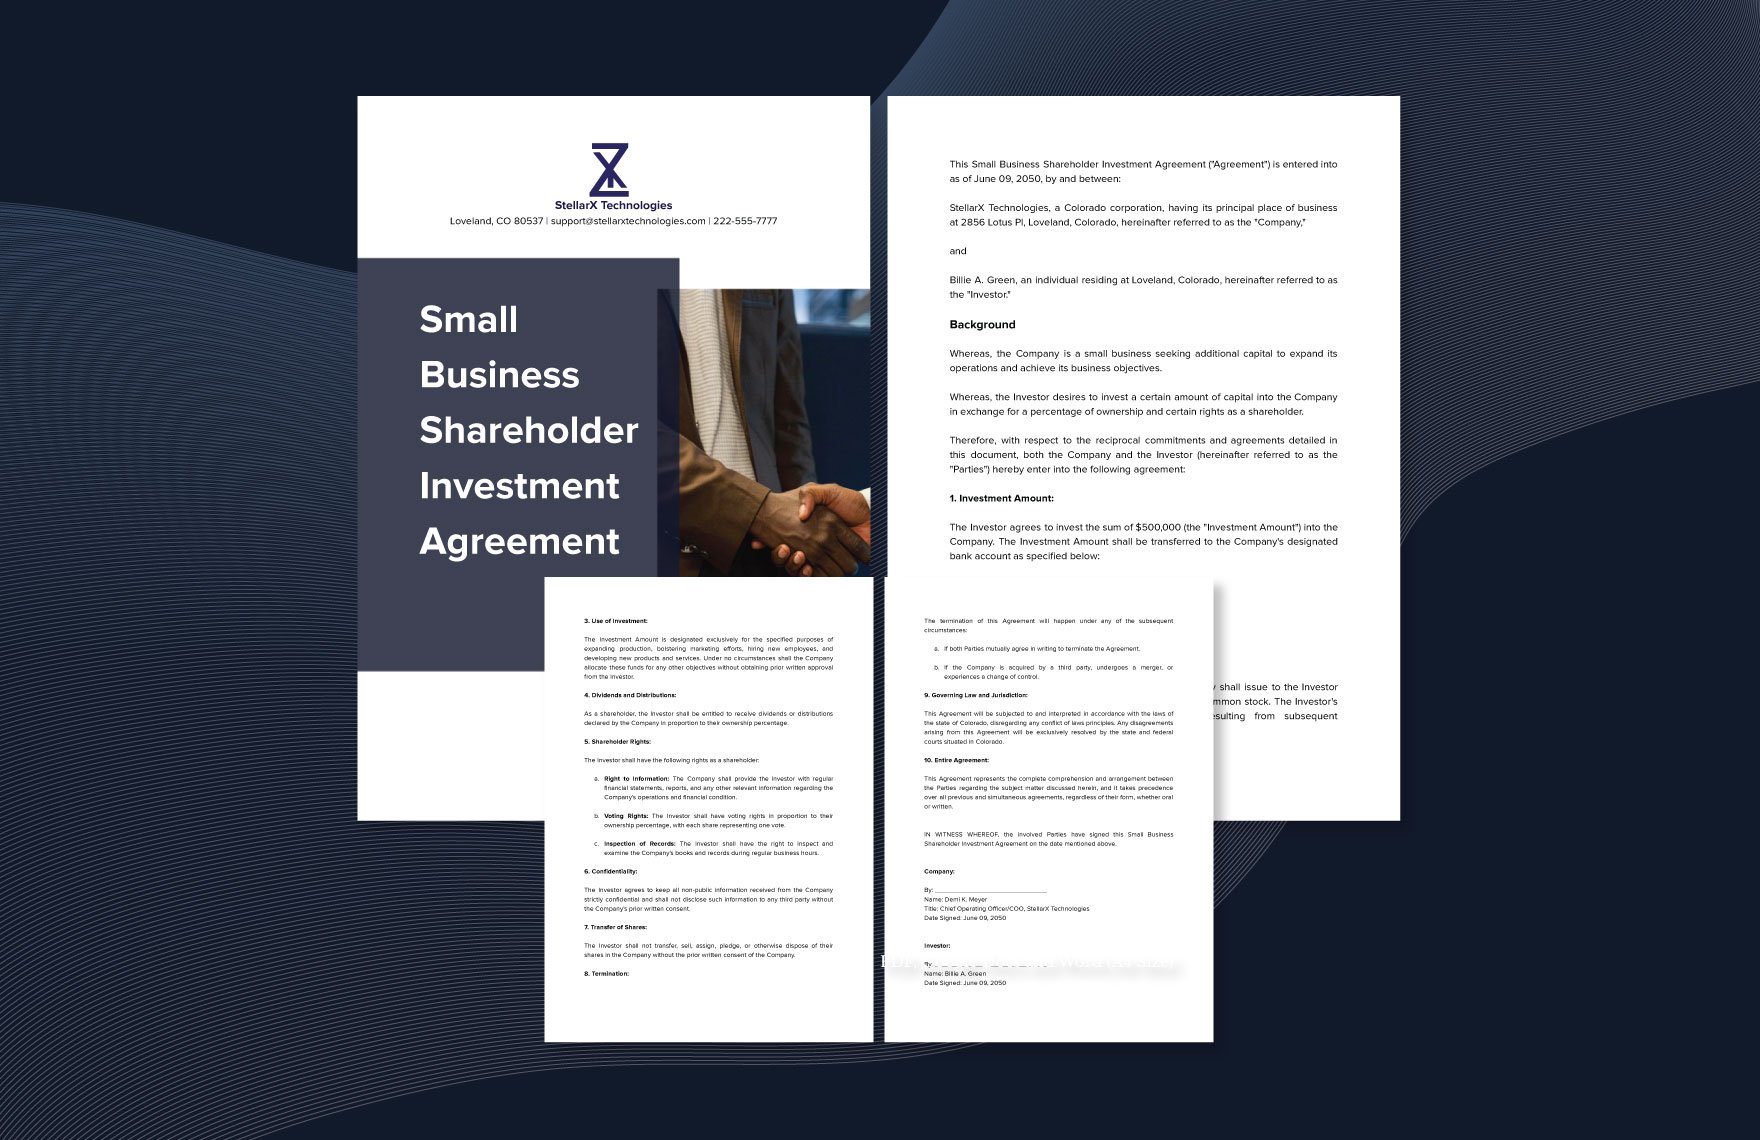 Small Business Shareholder Investment Agreement Template